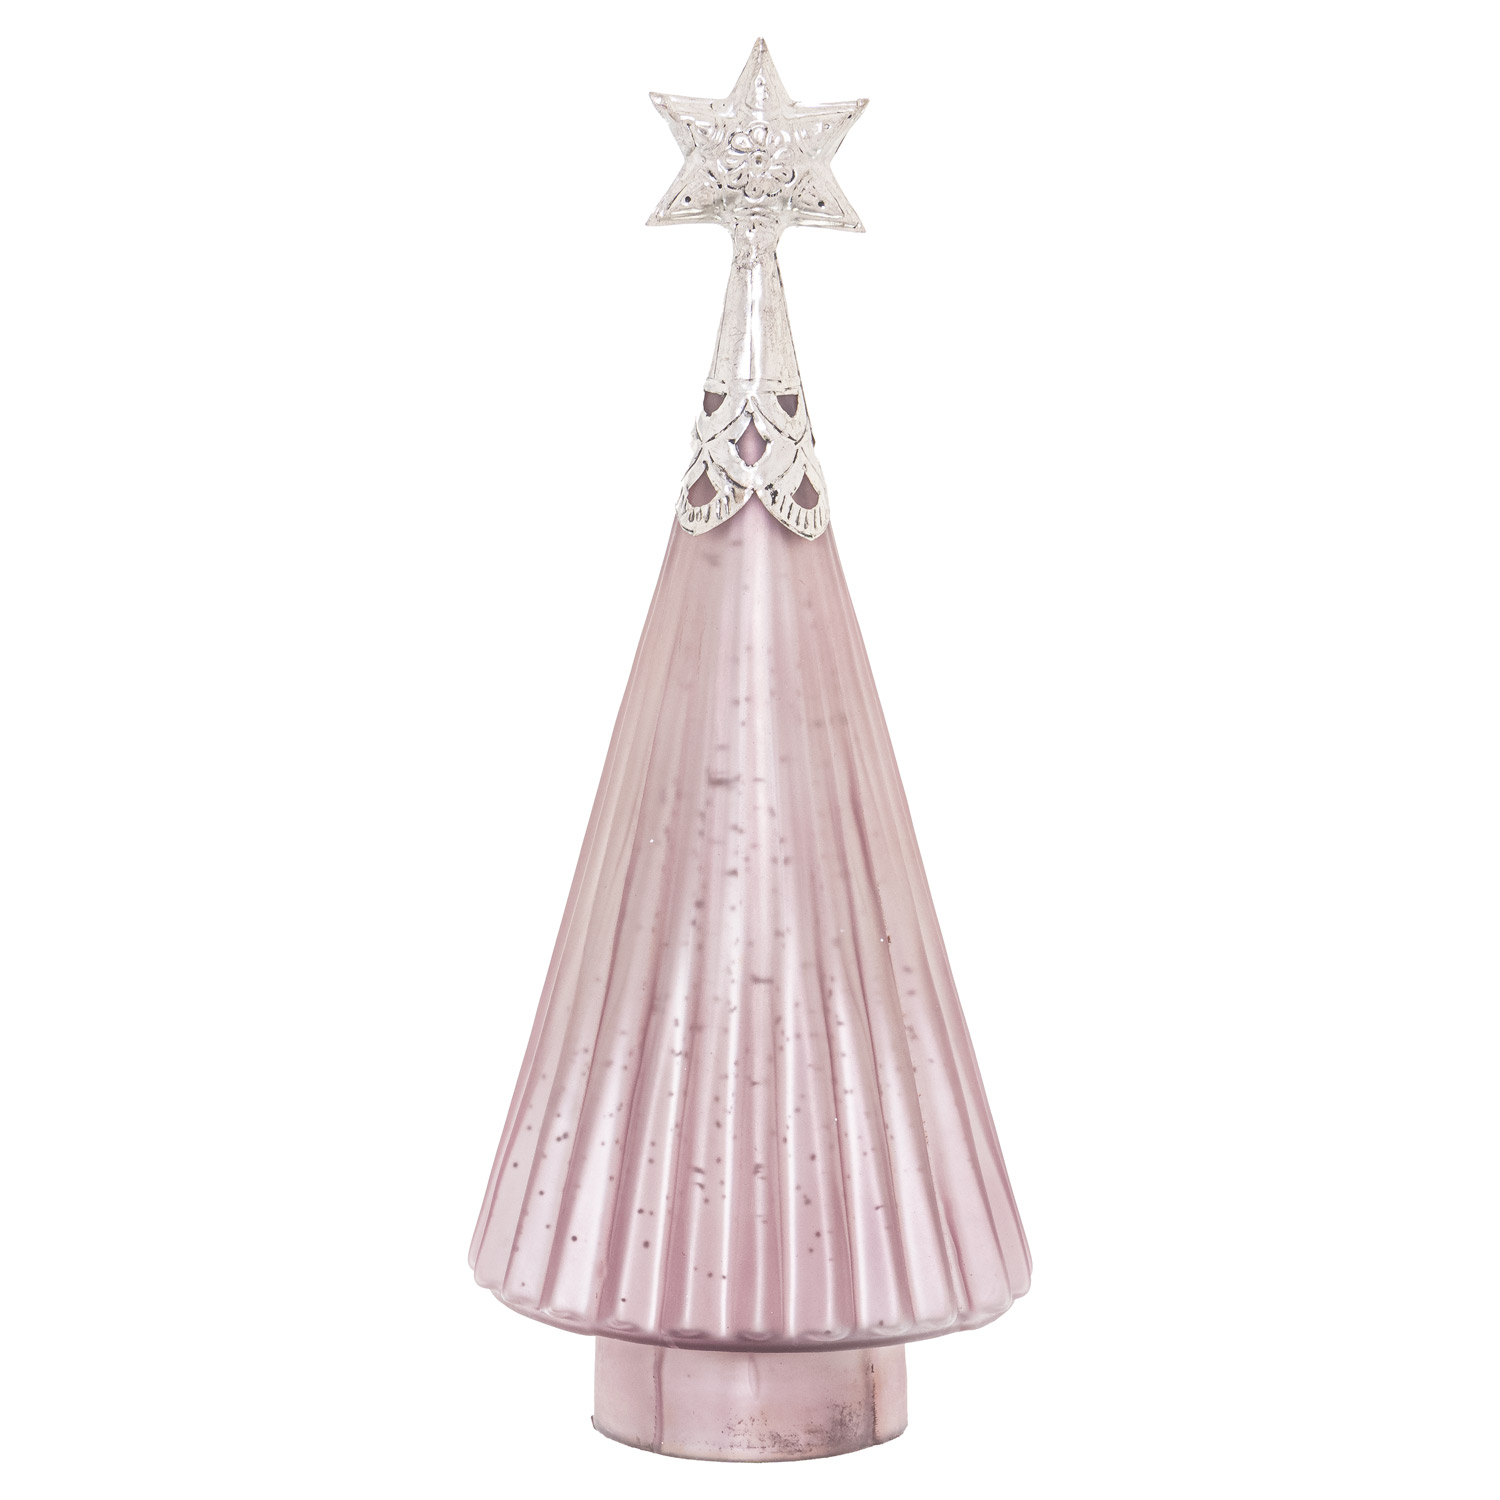 Noel Collection Venus Star Topped Decorative Tree - Image 1